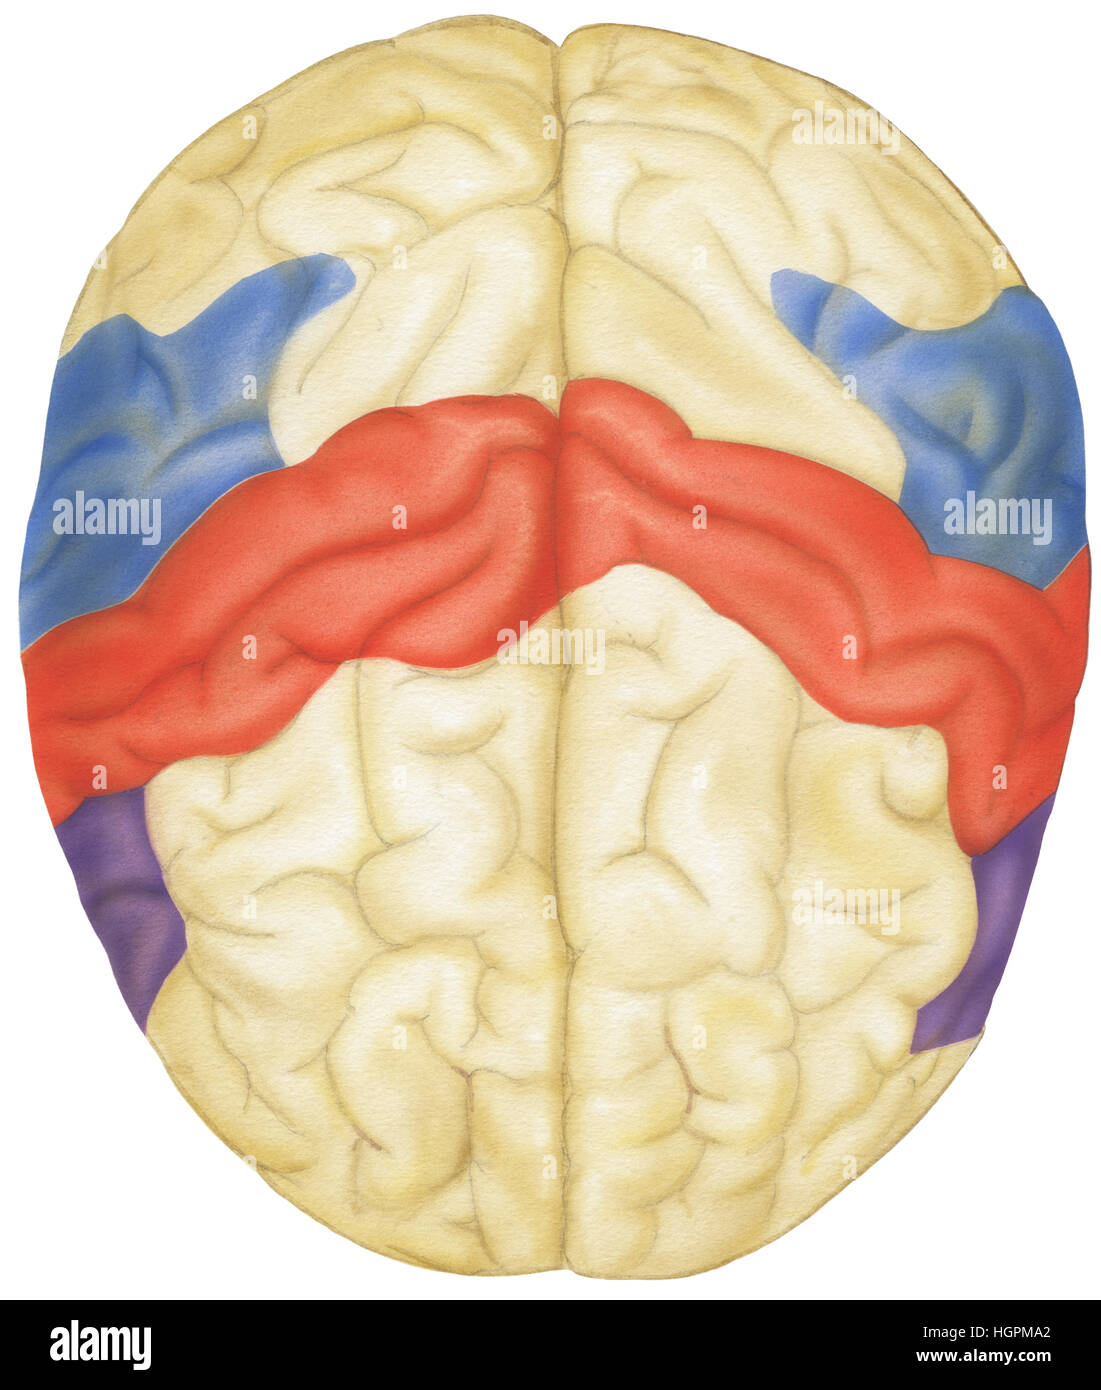 Top view of the human brain. Shown are the parietal lobes, sensory cortex, angular gyrus, Broca's area, frontal lobes and the motor cortex. Stock Photo